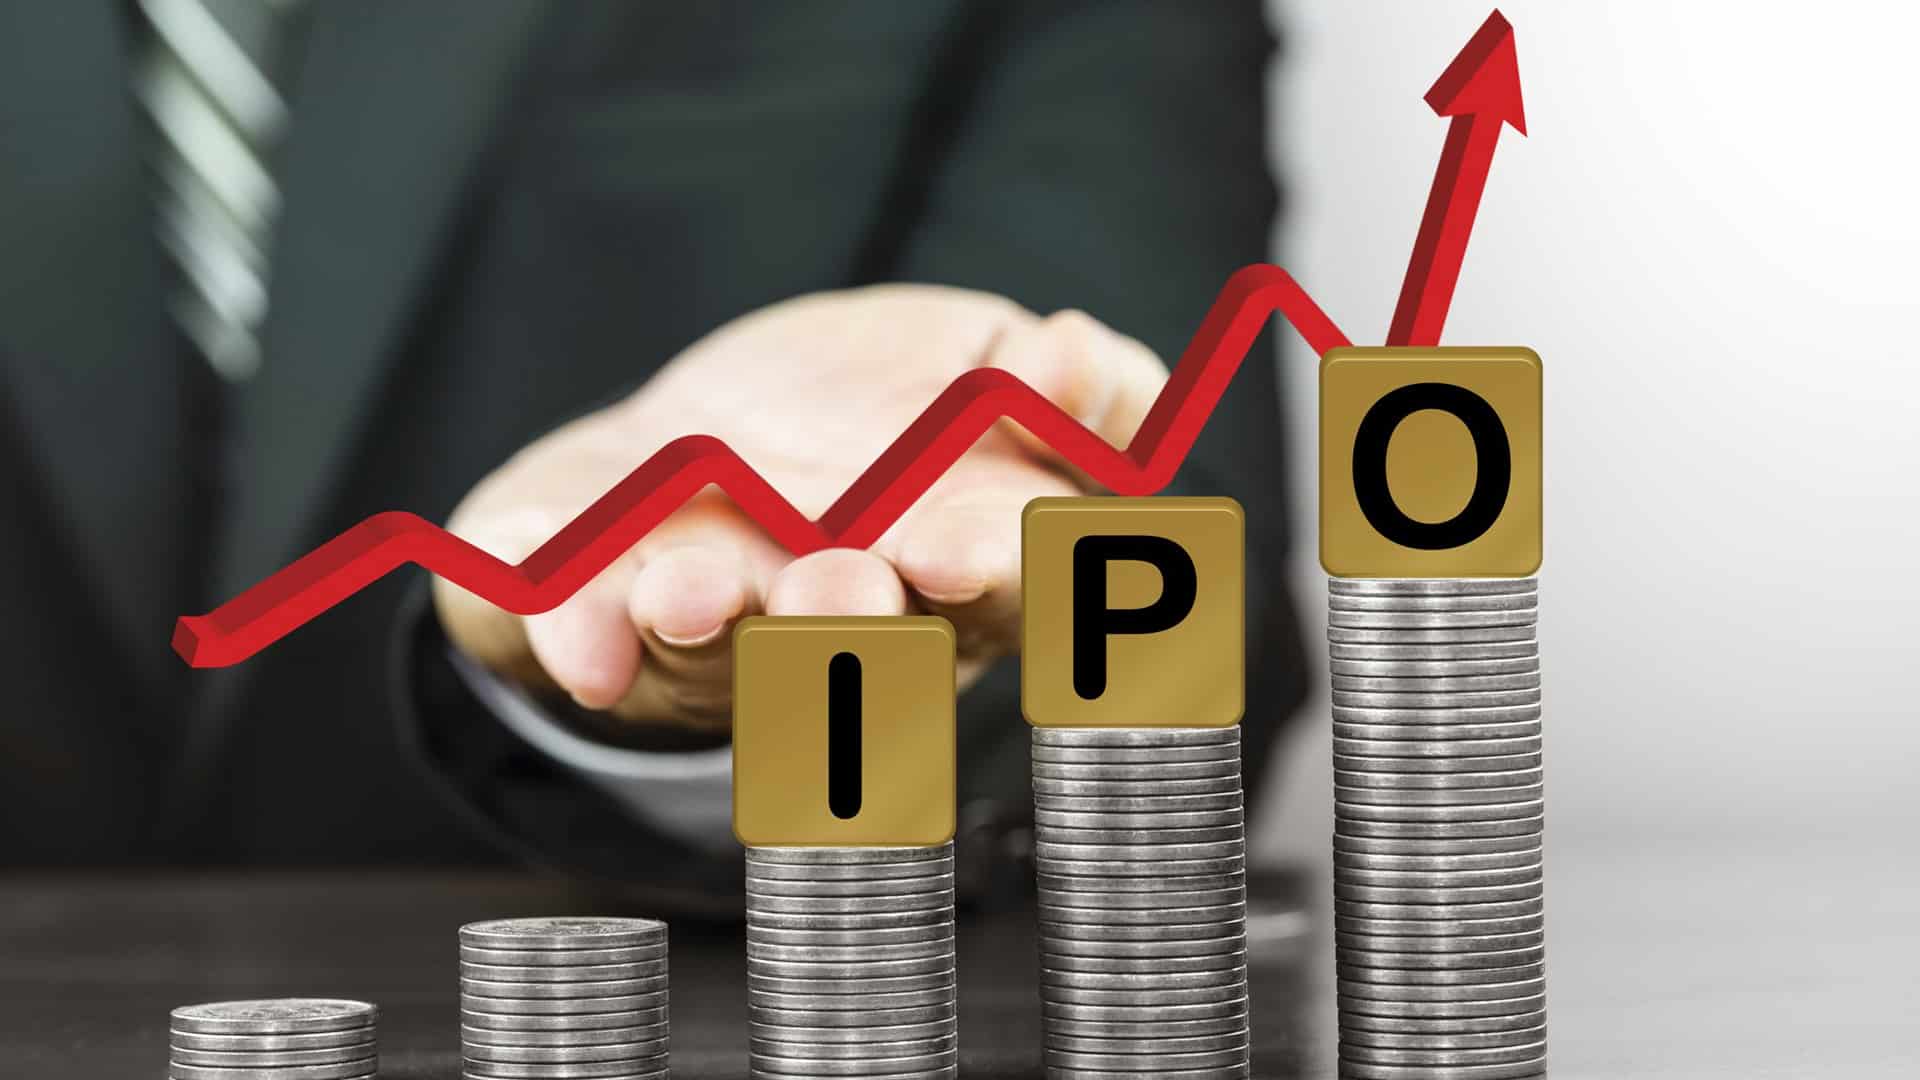 Sewerage infra player EMS plans to float IPO in Sep to raise up to Rs 320 cr